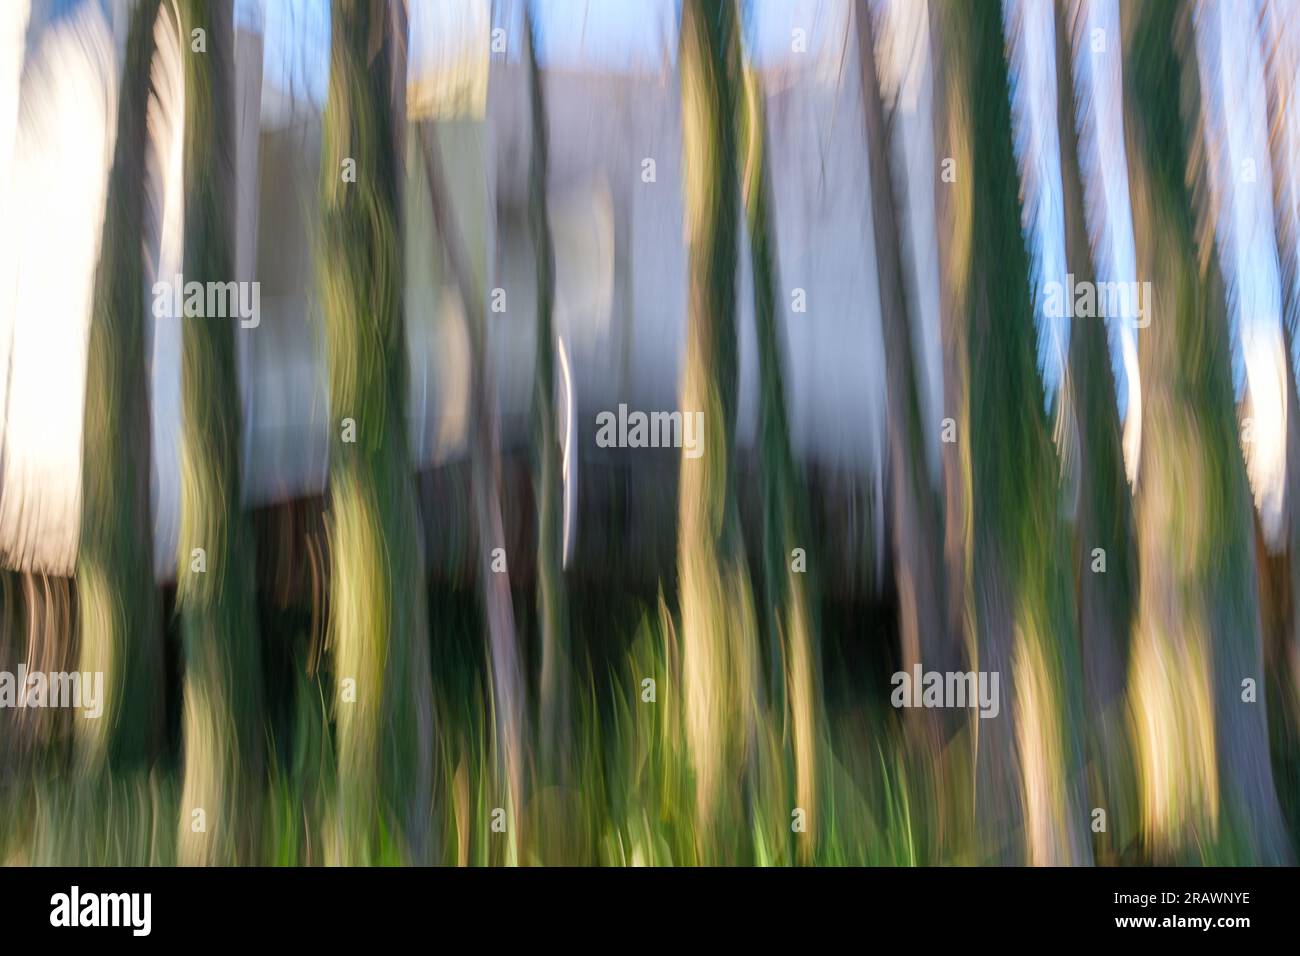 Intentionally blurred photo abstract of multiple cypress trees in a bed of irises in a residential setting Stock Photo